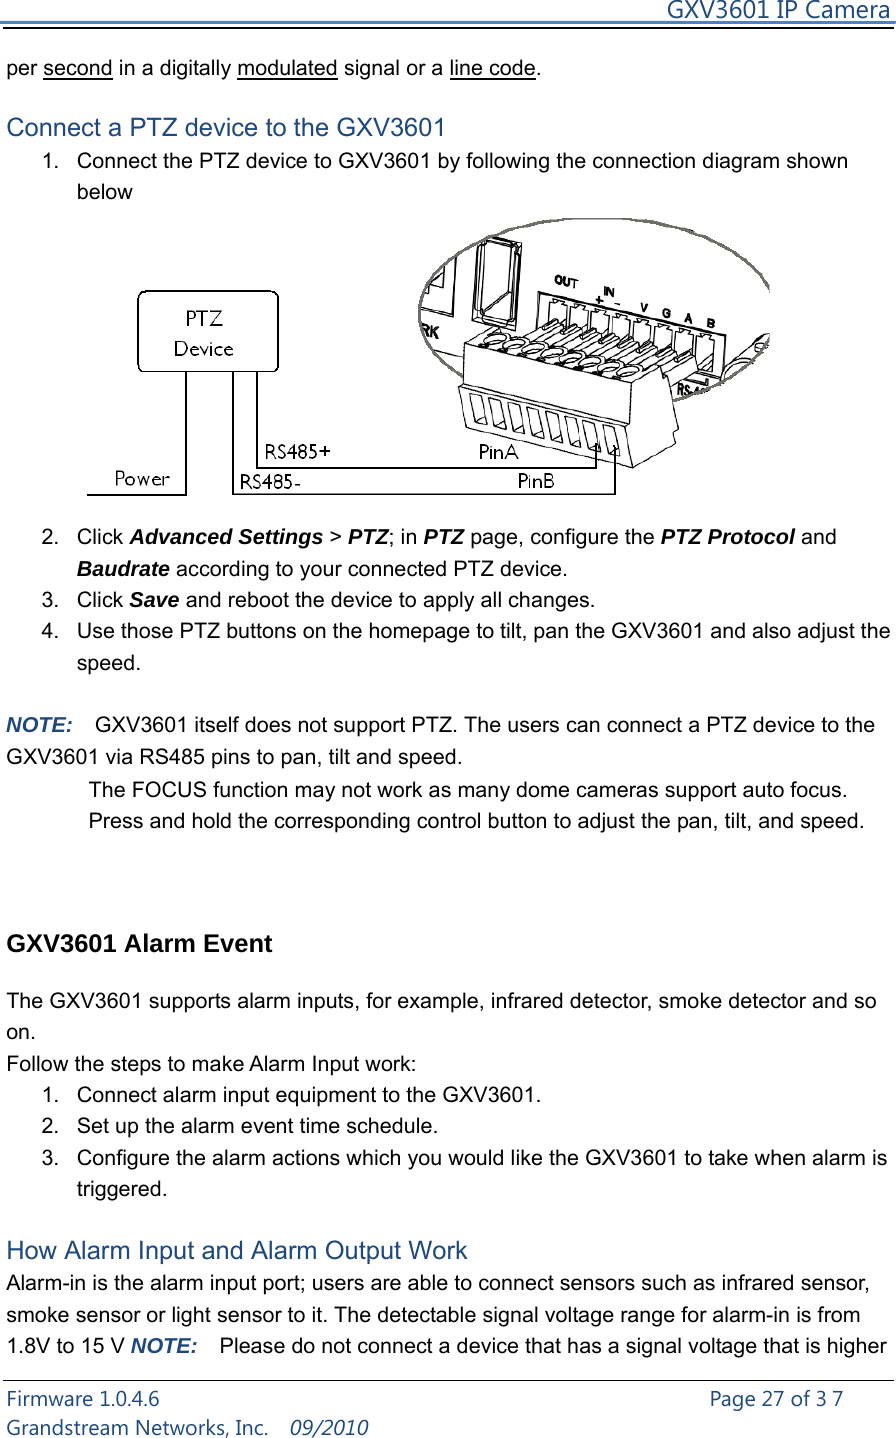     GXV3601 IP Camera Firmware 1.0.4.6                                                   Page 27 of 37   Grandstream Networks, Inc.  09/2010  per second in a digitally modulated signal or a line code.  Connect a PTZ device to the GXV3601   1.  Connect the PTZ device to GXV3601 by following the connection diagram shown below      2. Click Advanced Settings &gt; PTZ; in PTZ page, configure the PTZ Protocol and Baudrate according to your connected PTZ device. 3. Click Save and reboot the device to apply all changes.   4.  Use those PTZ buttons on the homepage to tilt, pan the GXV3601 and also adjust the speed.  NOTE:  GXV3601 itself does not support PTZ. The users can connect a PTZ device to the GXV3601 via RS485 pins to pan, tilt and speed. The FOCUS function may not work as many dome cameras support auto focus.       Press and hold the corresponding control button to adjust the pan, tilt, and speed.    GXV3601 Alarm Event    The GXV3601 supports alarm inputs, for example, infrared detector, smoke detector and so on.   Follow the steps to make Alarm Input work: 1.  Connect alarm input equipment to the GXV3601. 2.  Set up the alarm event time schedule. 3.  Configure the alarm actions which you would like the GXV3601 to take when alarm is triggered.  How Alarm Input and Alarm Output Work Alarm-in is the alarm input port; users are able to connect sensors such as infrared sensor, smoke sensor or light sensor to it. The detectable signal voltage range for alarm-in is from 1.8V to 15 V NOTE:    Please do not connect a device that has a signal voltage that is higher 